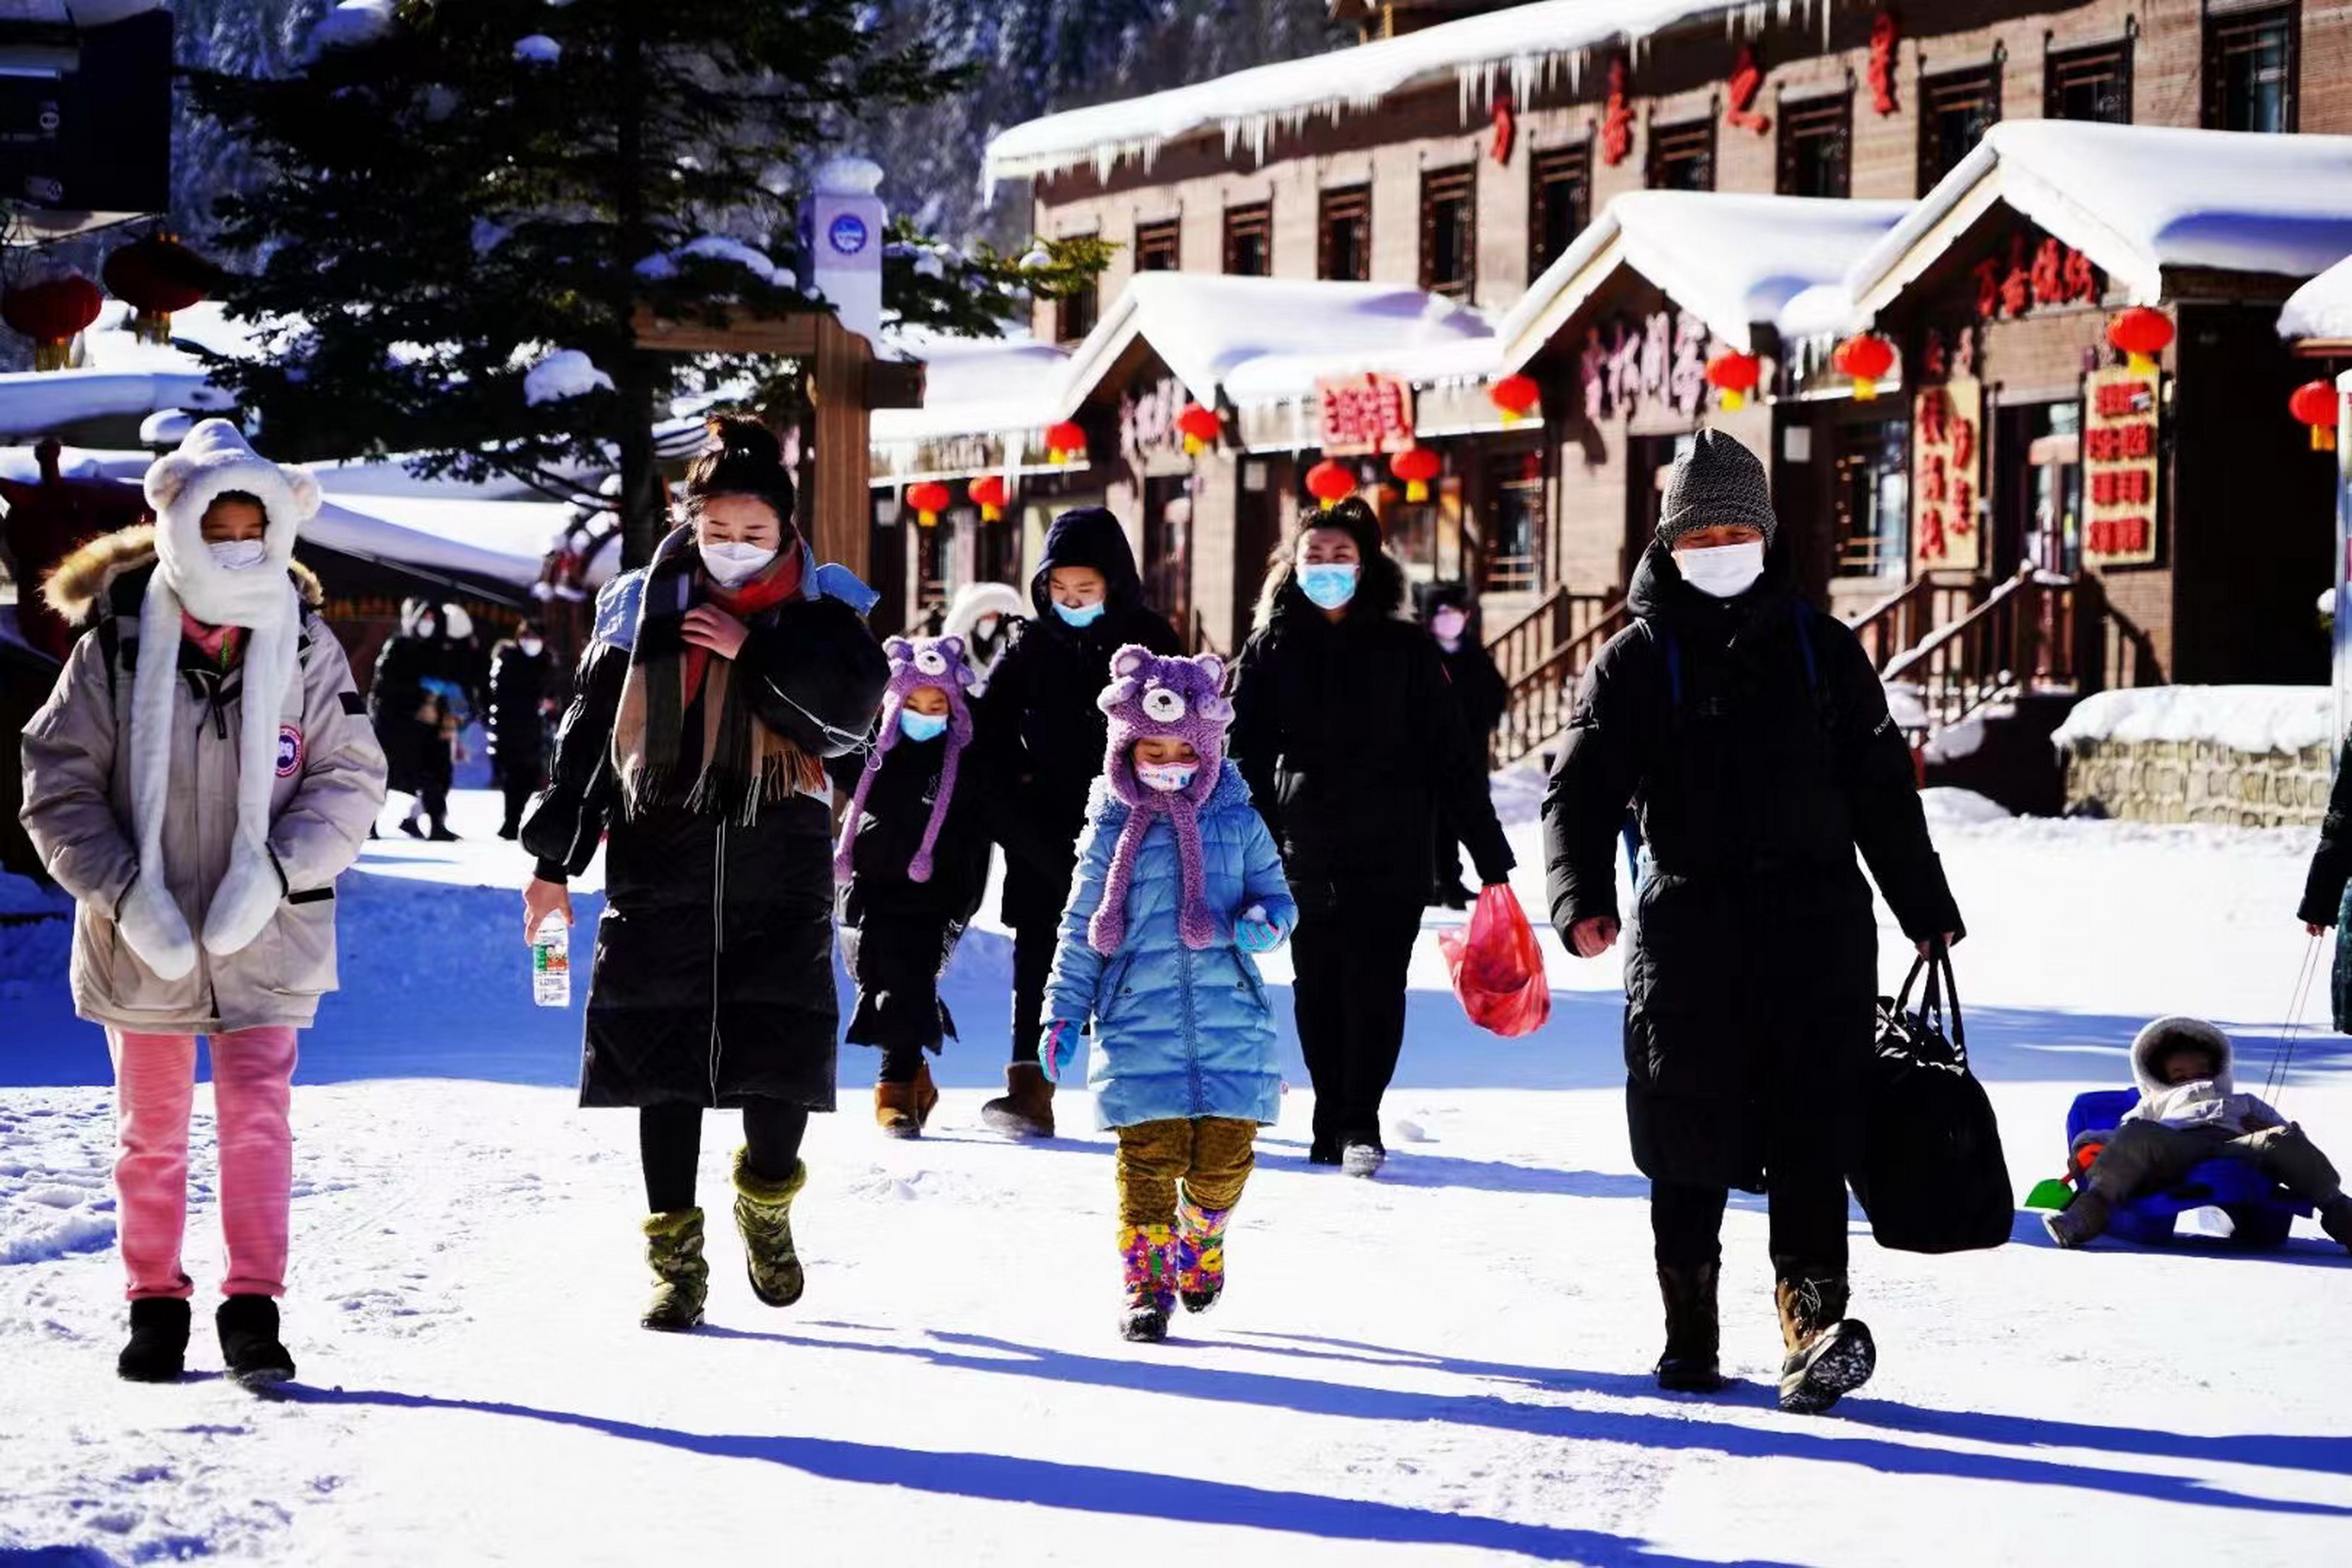 Visitors walk in a snowy scenic spot in Hailin, Northeast China’s Heilongjiang Province on December 12, 2022. The scenic spot opened the same day after intense preparations. It is expected that China’s snow sports market will exceed 800 billion yuan ($115 billion) in 2022. Photo: VCG